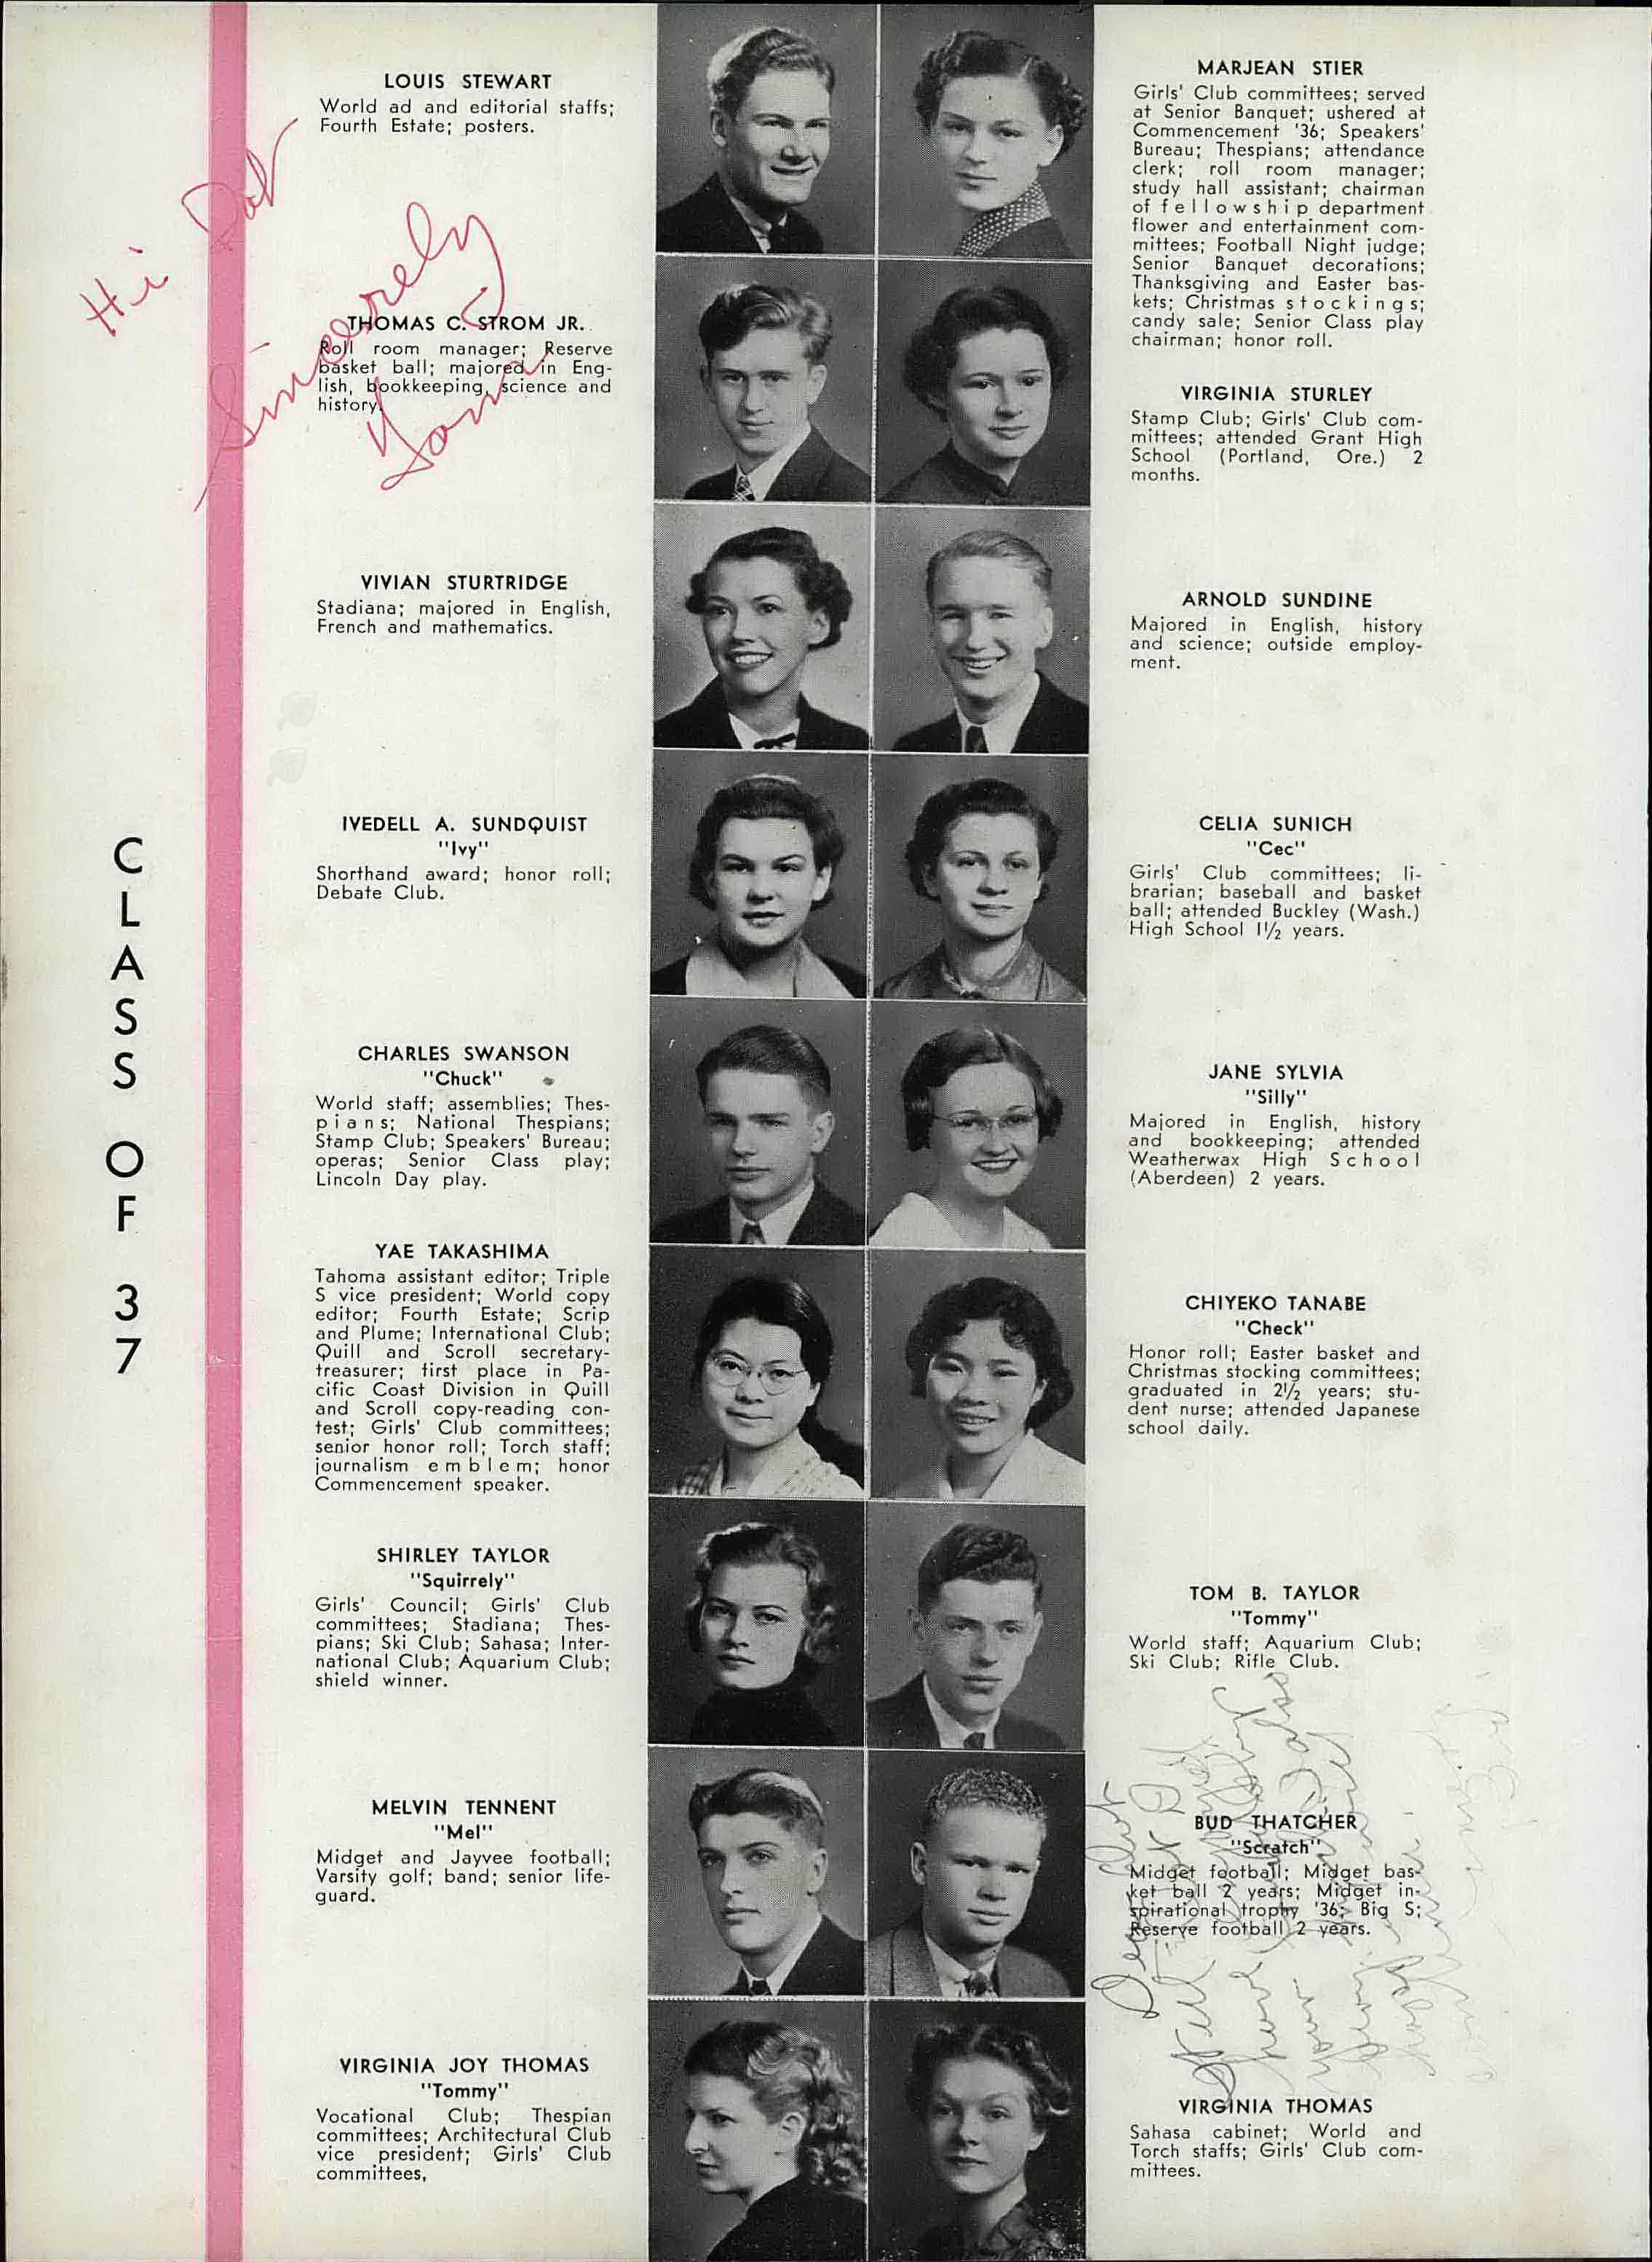 Chiyeko Tanabe in Stadium High School's Yearbook, pictured fourth from the bottom on the right. Courtesy AncestryLibrary.com